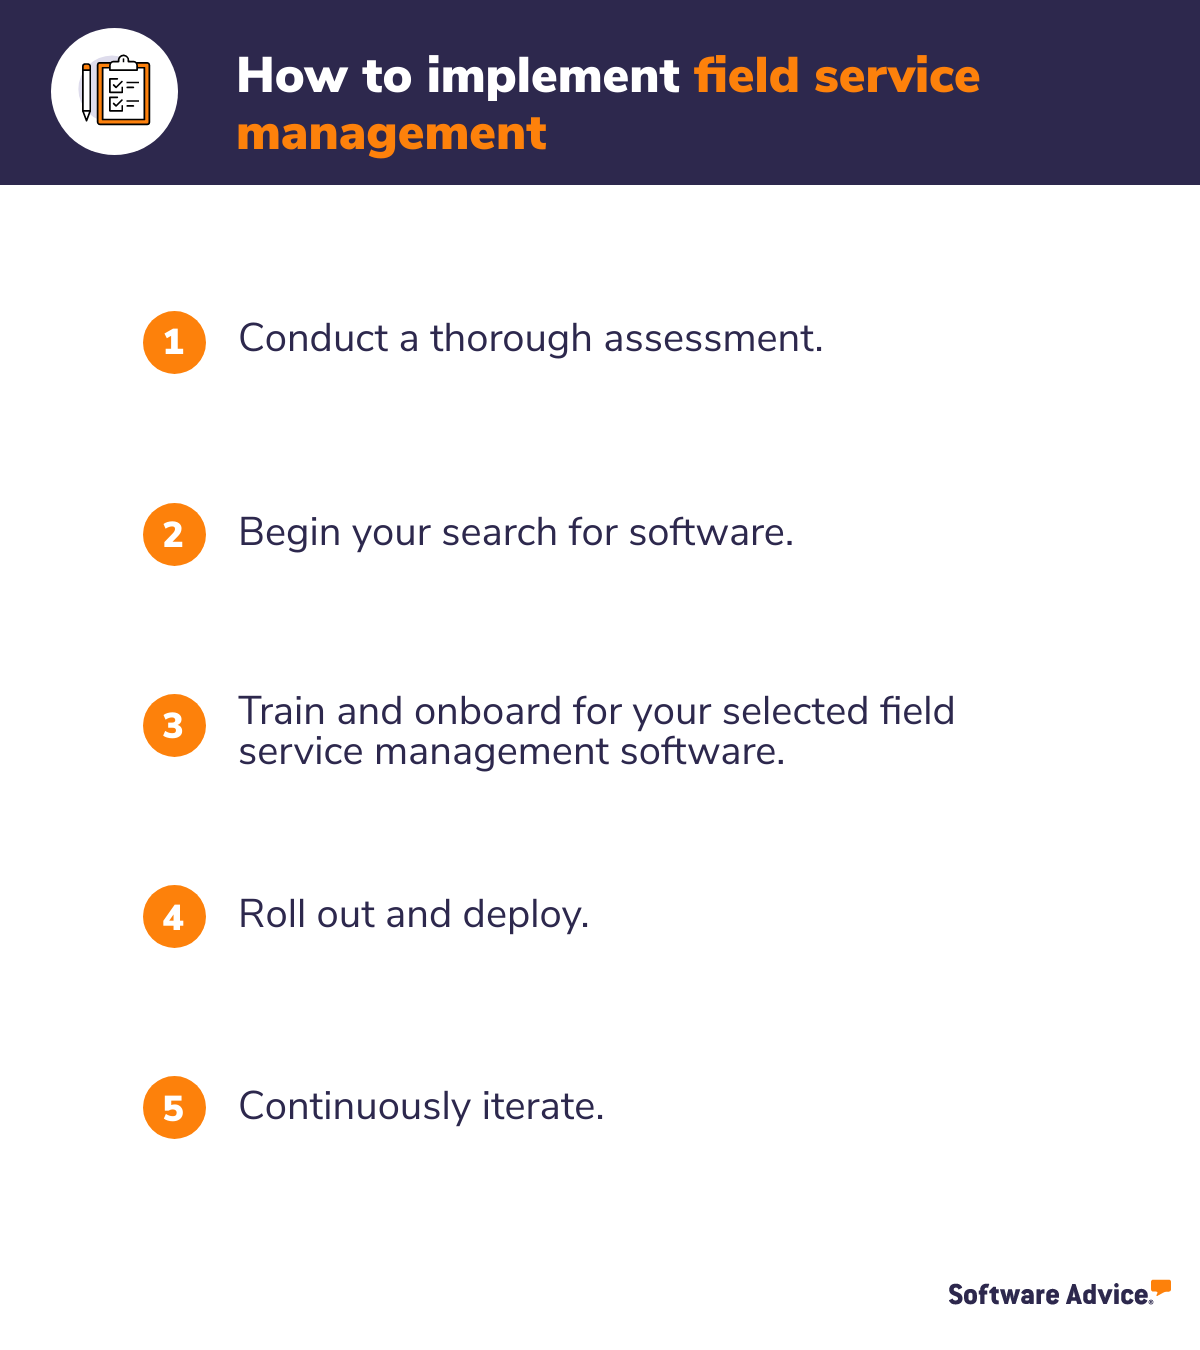 How to implement field service management